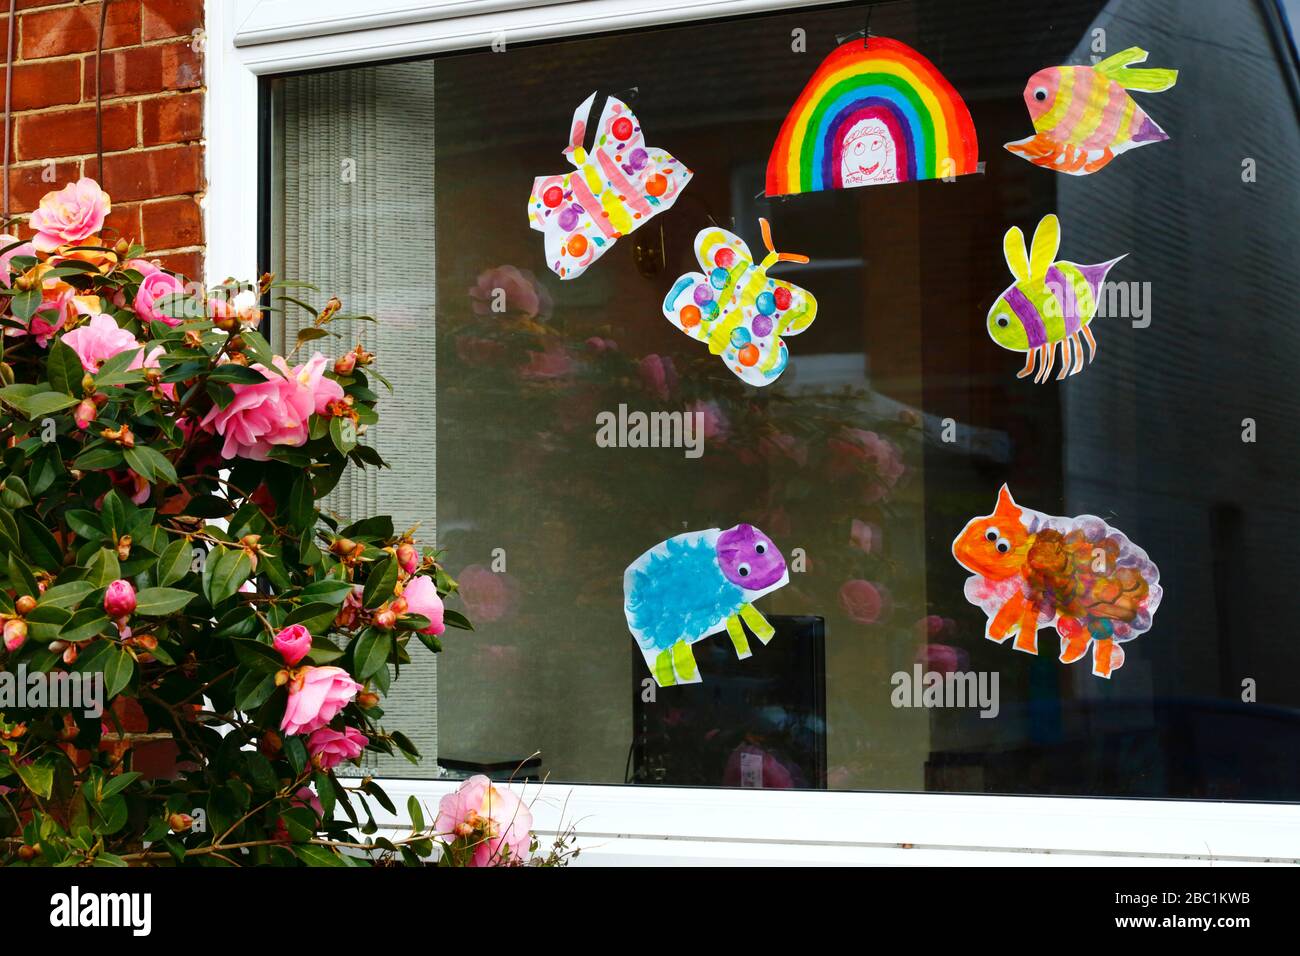 1st April 2020, Southborough, Kent, UK: Children's drawings of insects, animals and a rainbow for passers by in window of a house during the government imposed quarantine / lockdown to reduce the spread of the coronavirus. Children across the country have been putting drawings of rainbows in windows to spread hope and encourage people to stay cheerful during the pandemic. Stock Photo